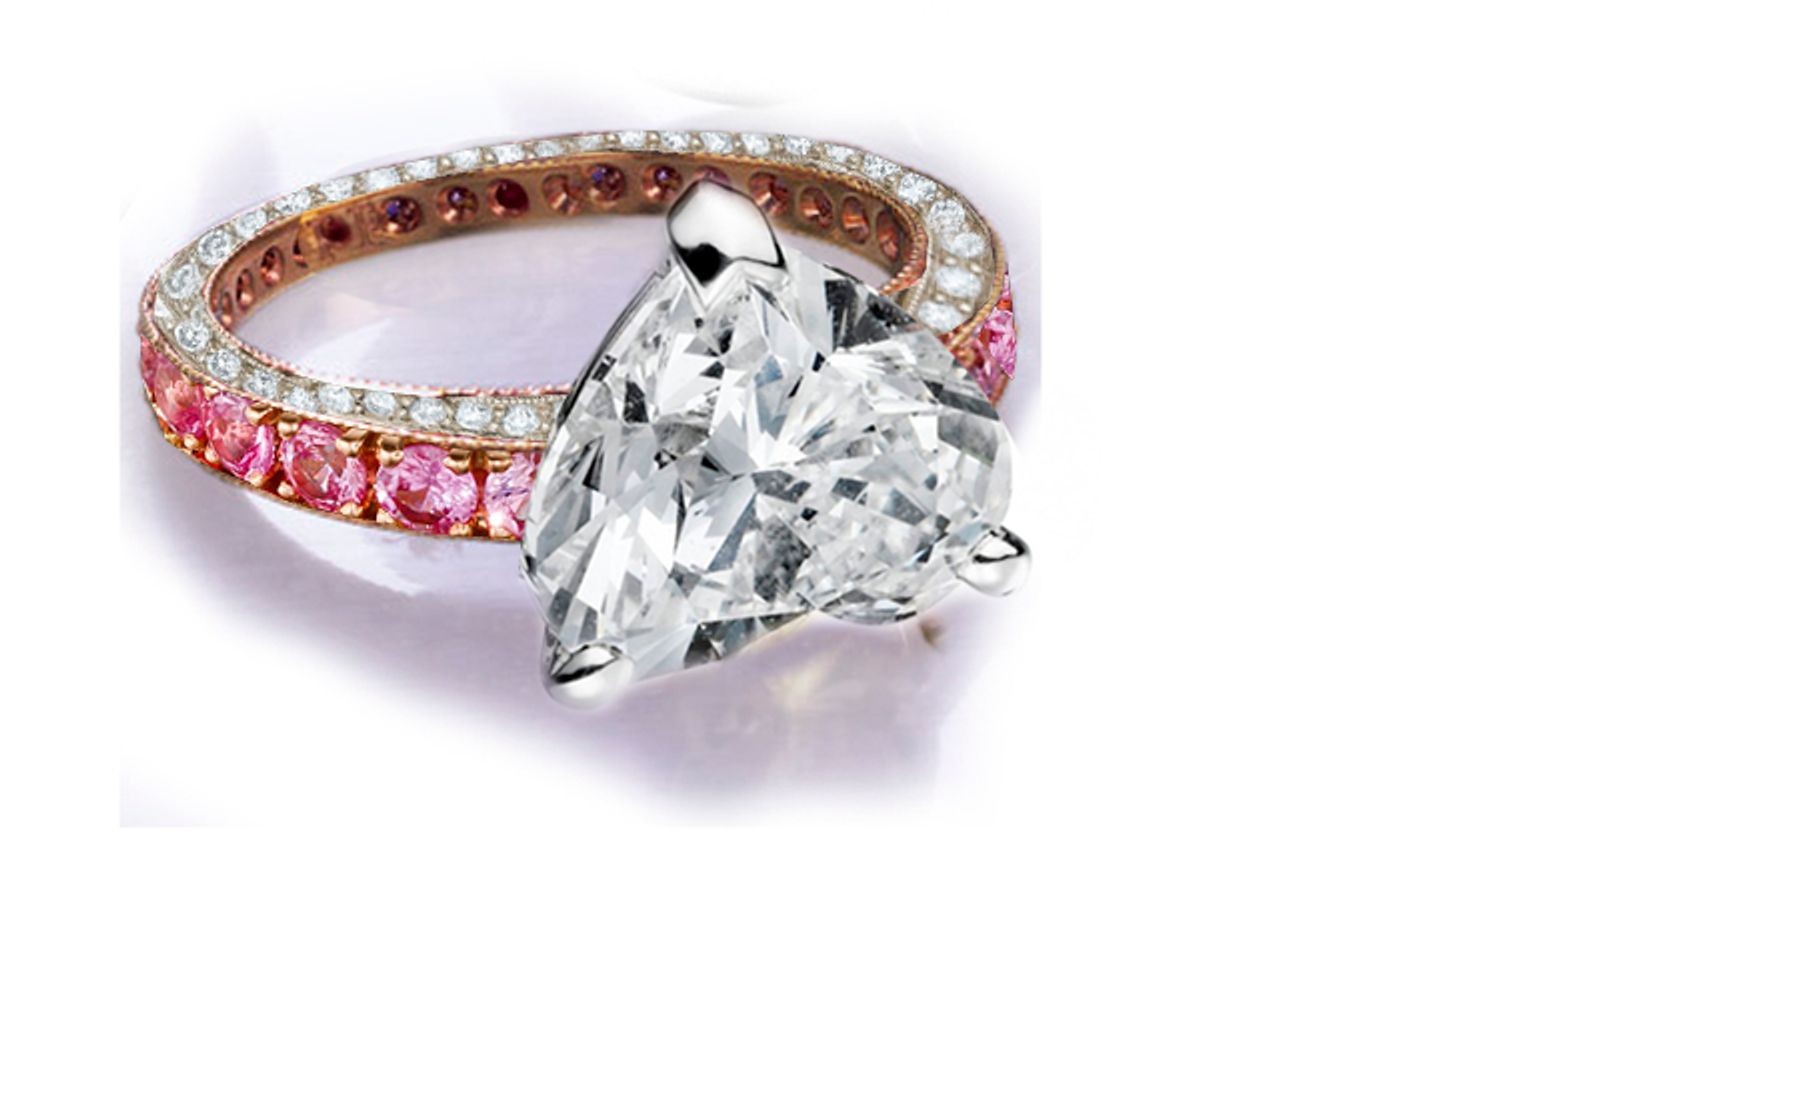 Ring with Heart Diamond & Pave Set Diamonds & Pink Sapphires in Gold or Platinum